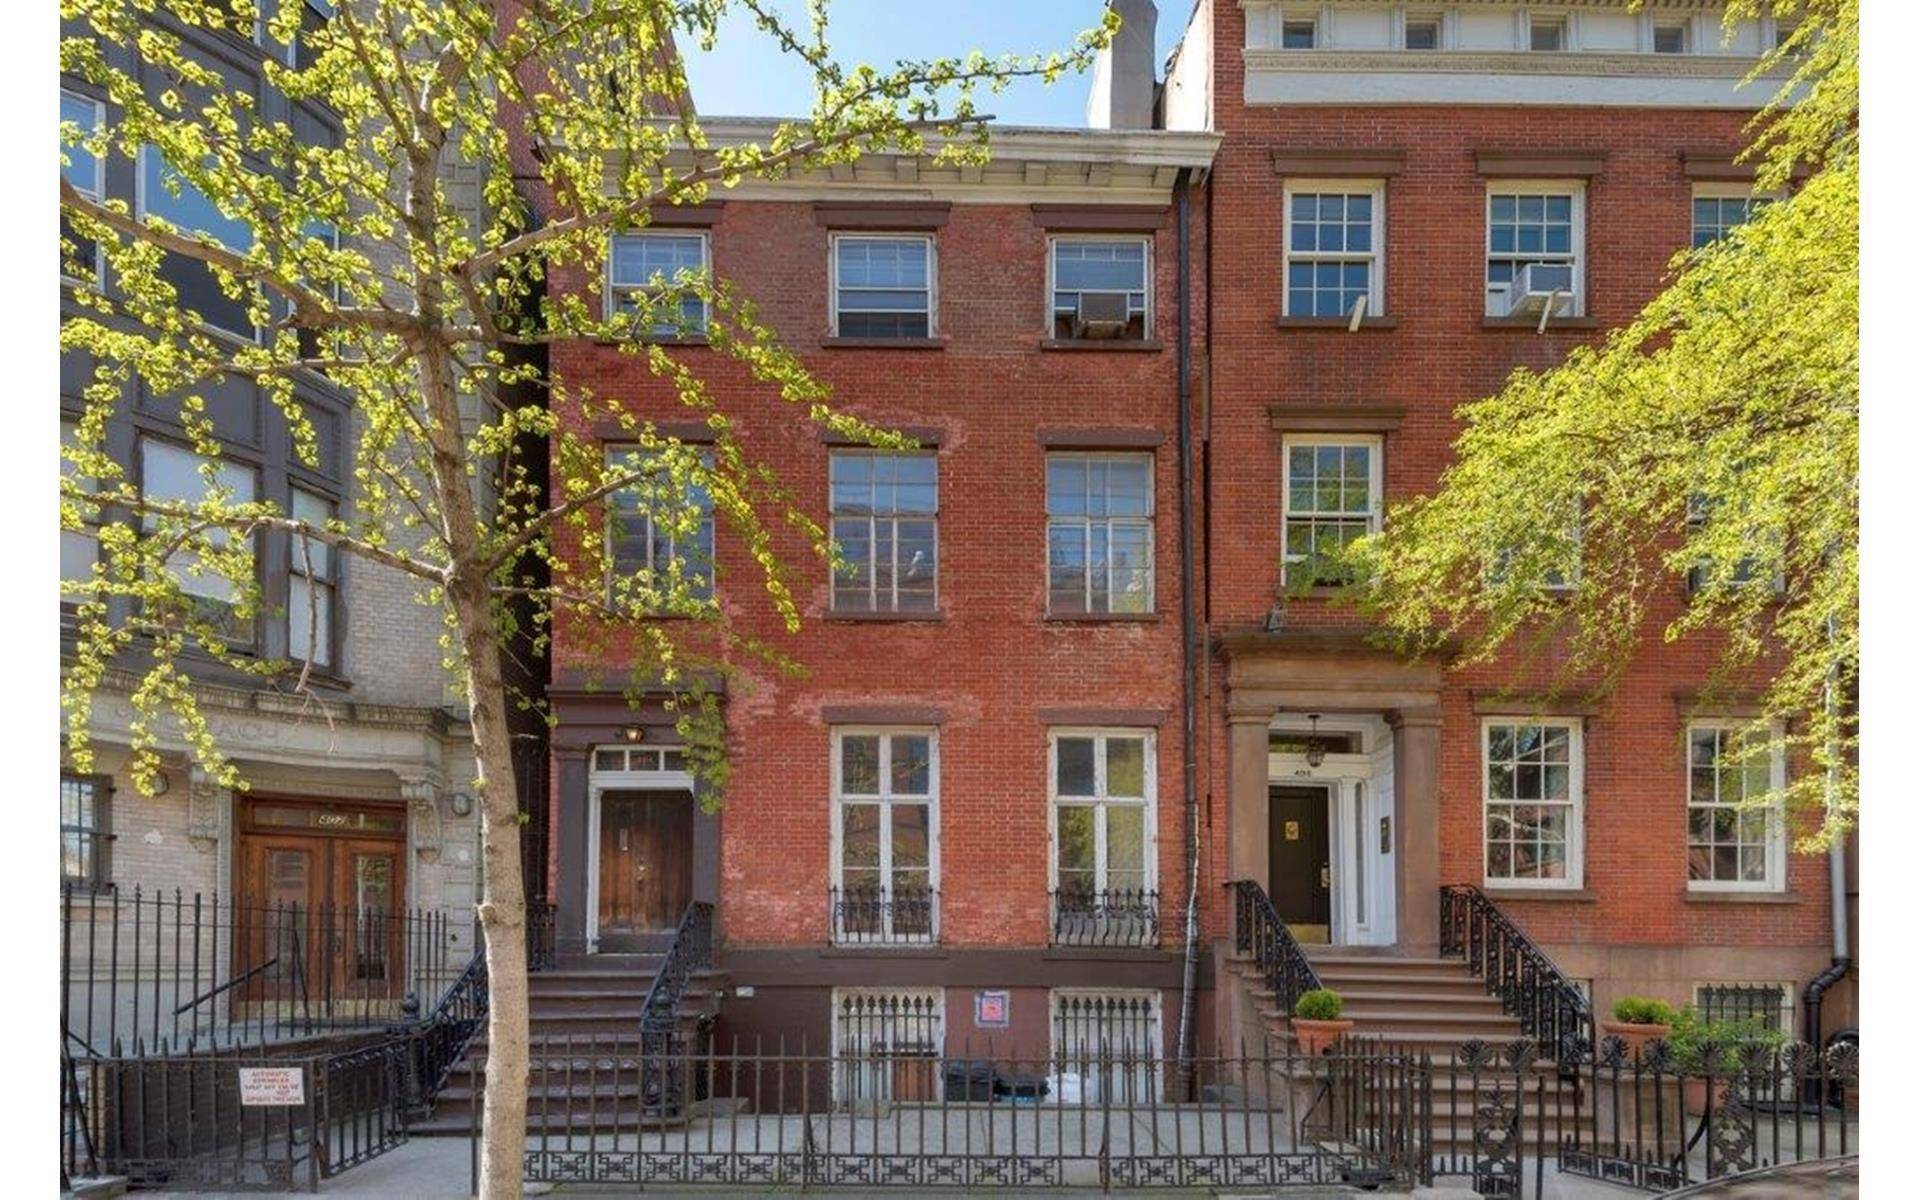 404 West 20th Street is officially acknowledged as the Oldest Dwelling within the Chelsea Historic District.